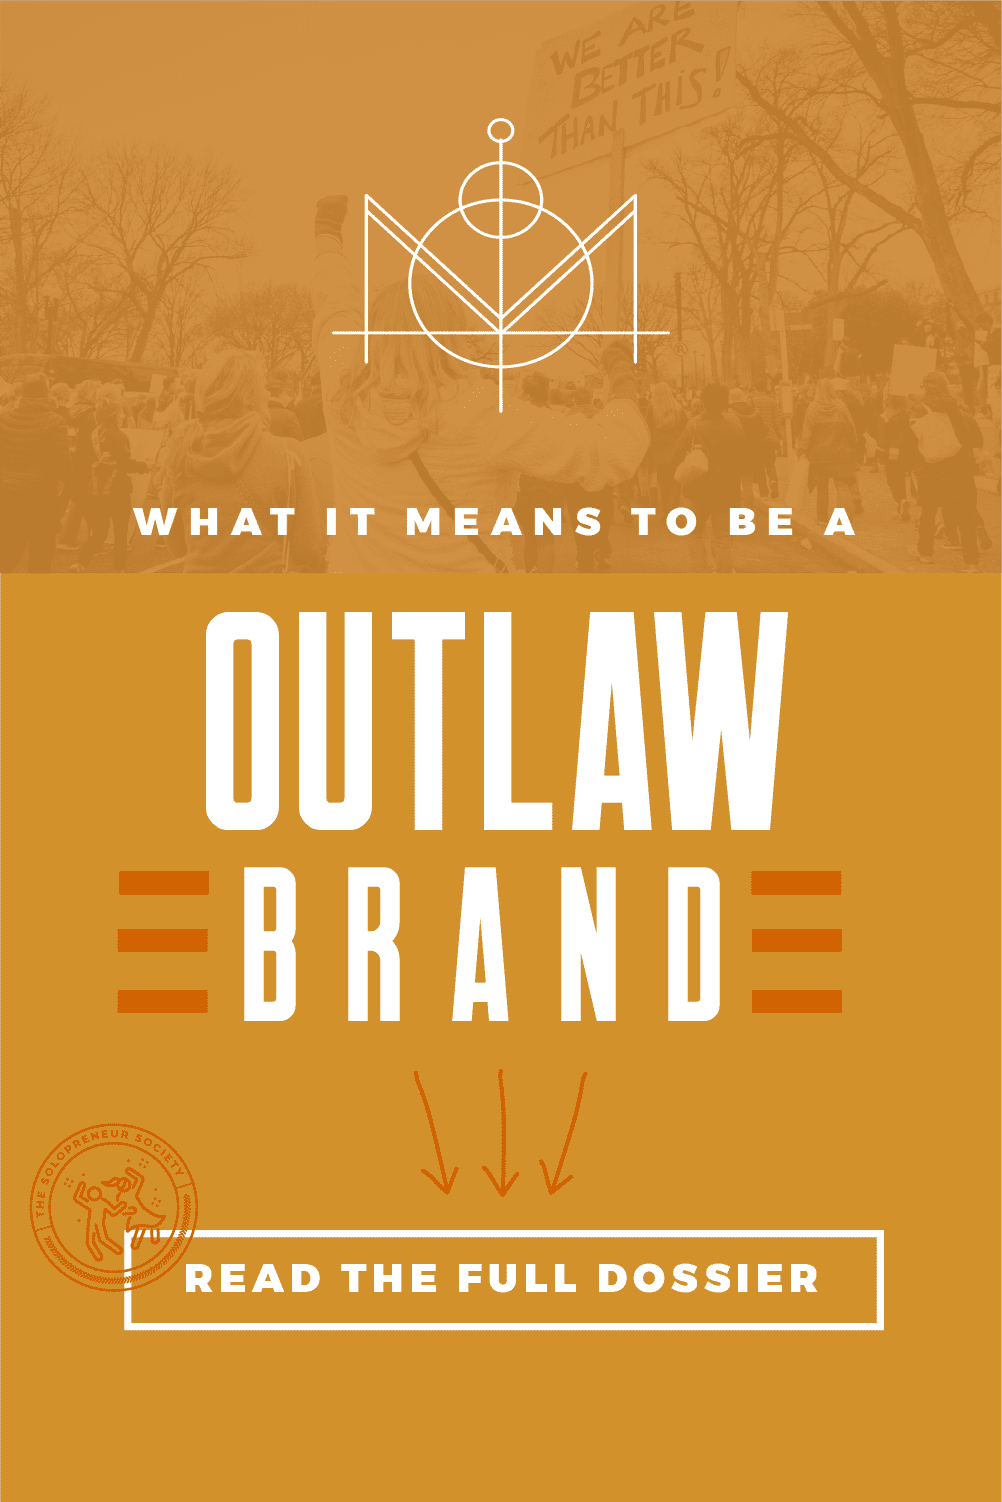 Outlaw Brand Personality